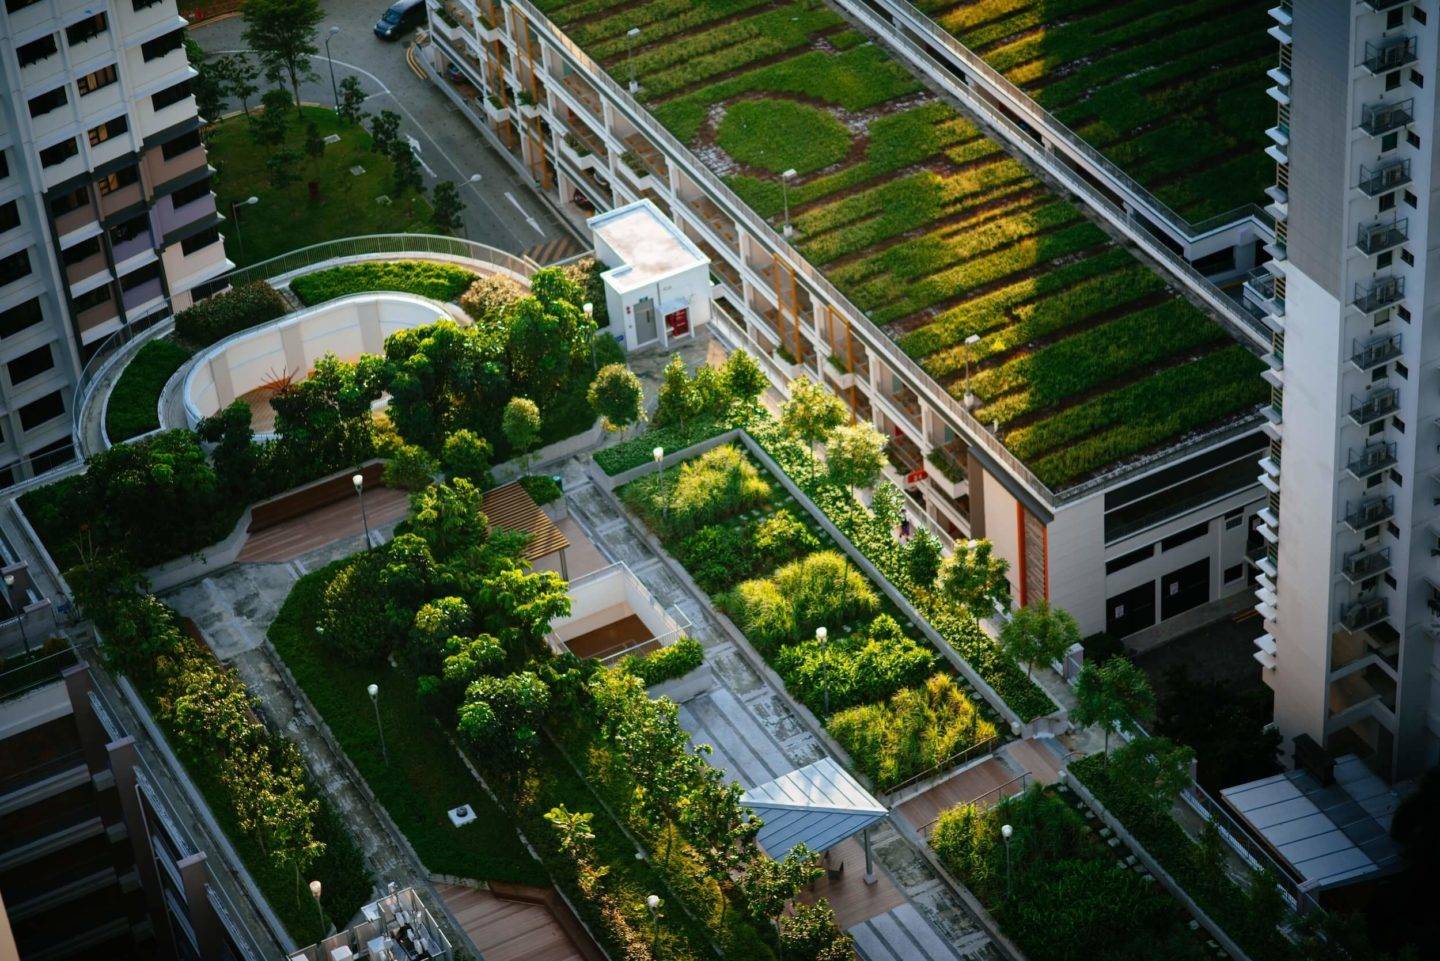 Rooftops covered in greenery, plant beds, grass and trees